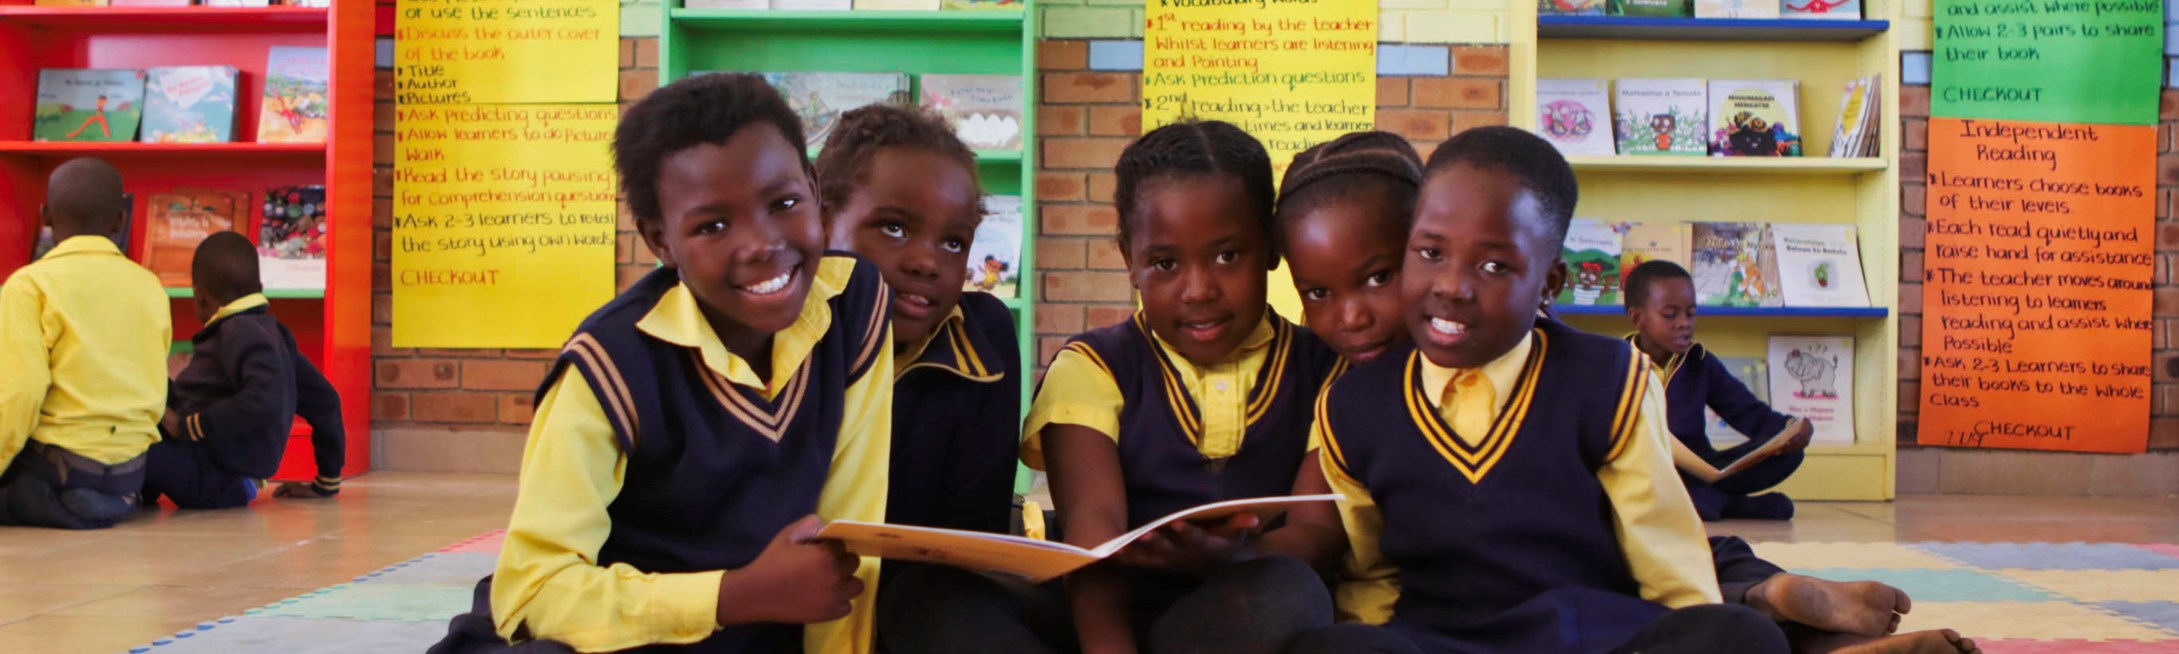 A group of primary school students in South Africa read together in a school library. 